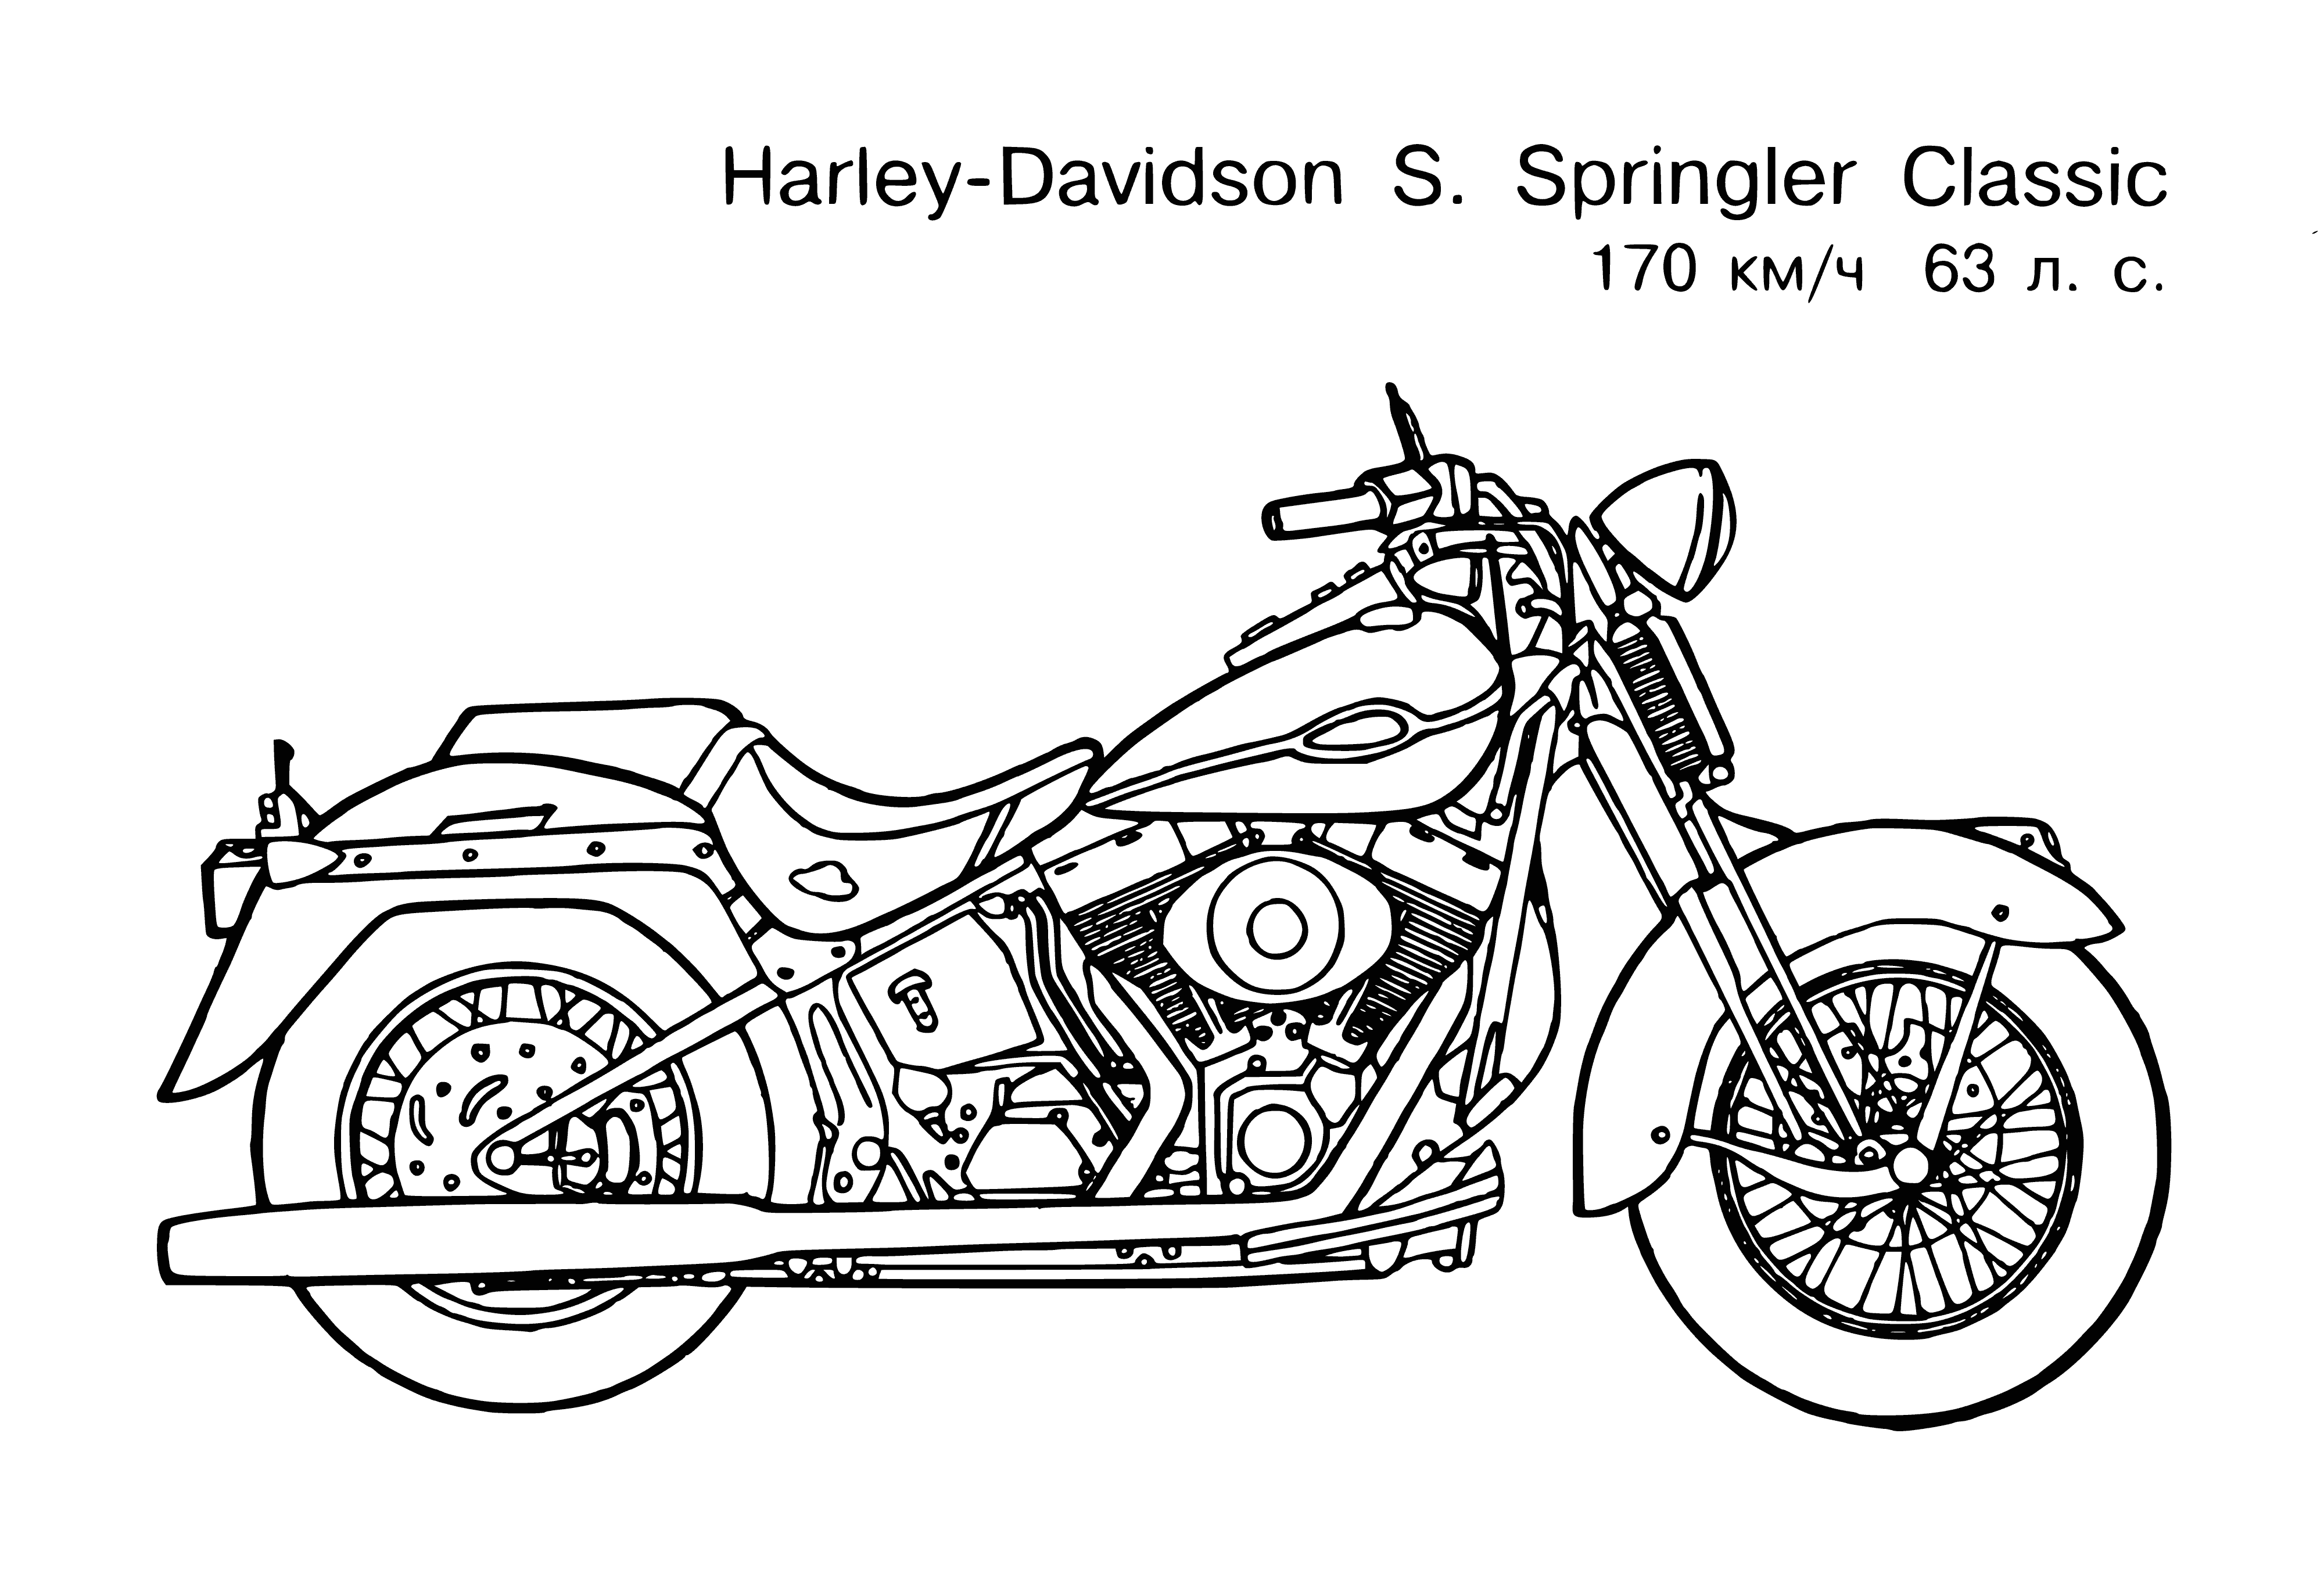 coloring page: Motorcycles are fast & loud 2-wheeled vehicles w/engines between rider's legs & wheels in back, much smaller than cars.